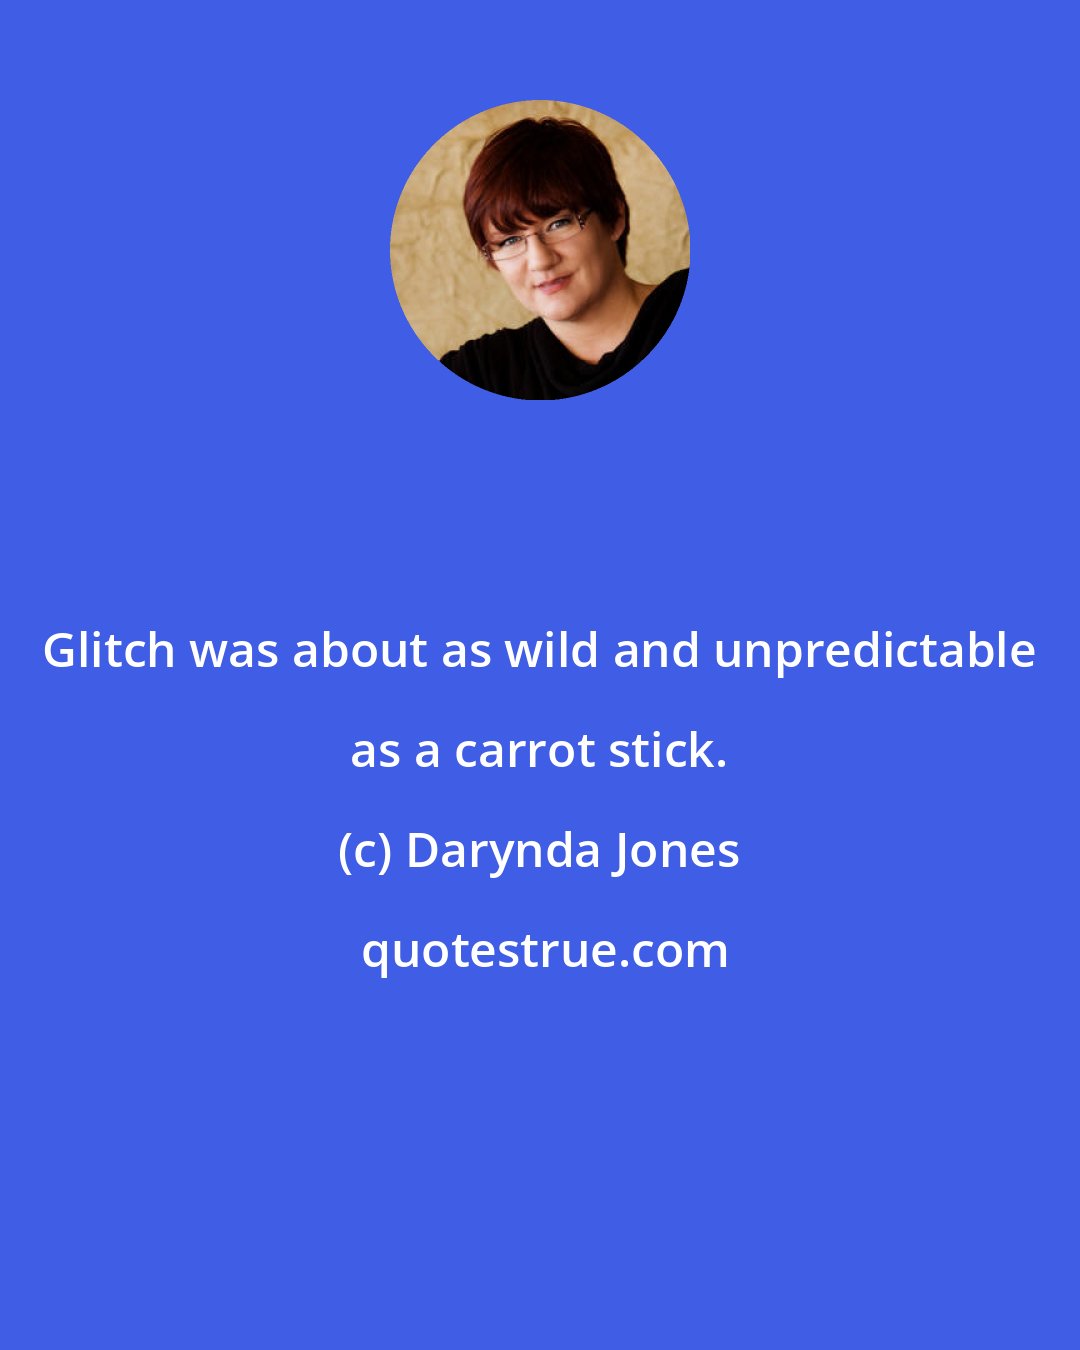 Darynda Jones: Glitch was about as wild and unpredictable as a carrot stick.